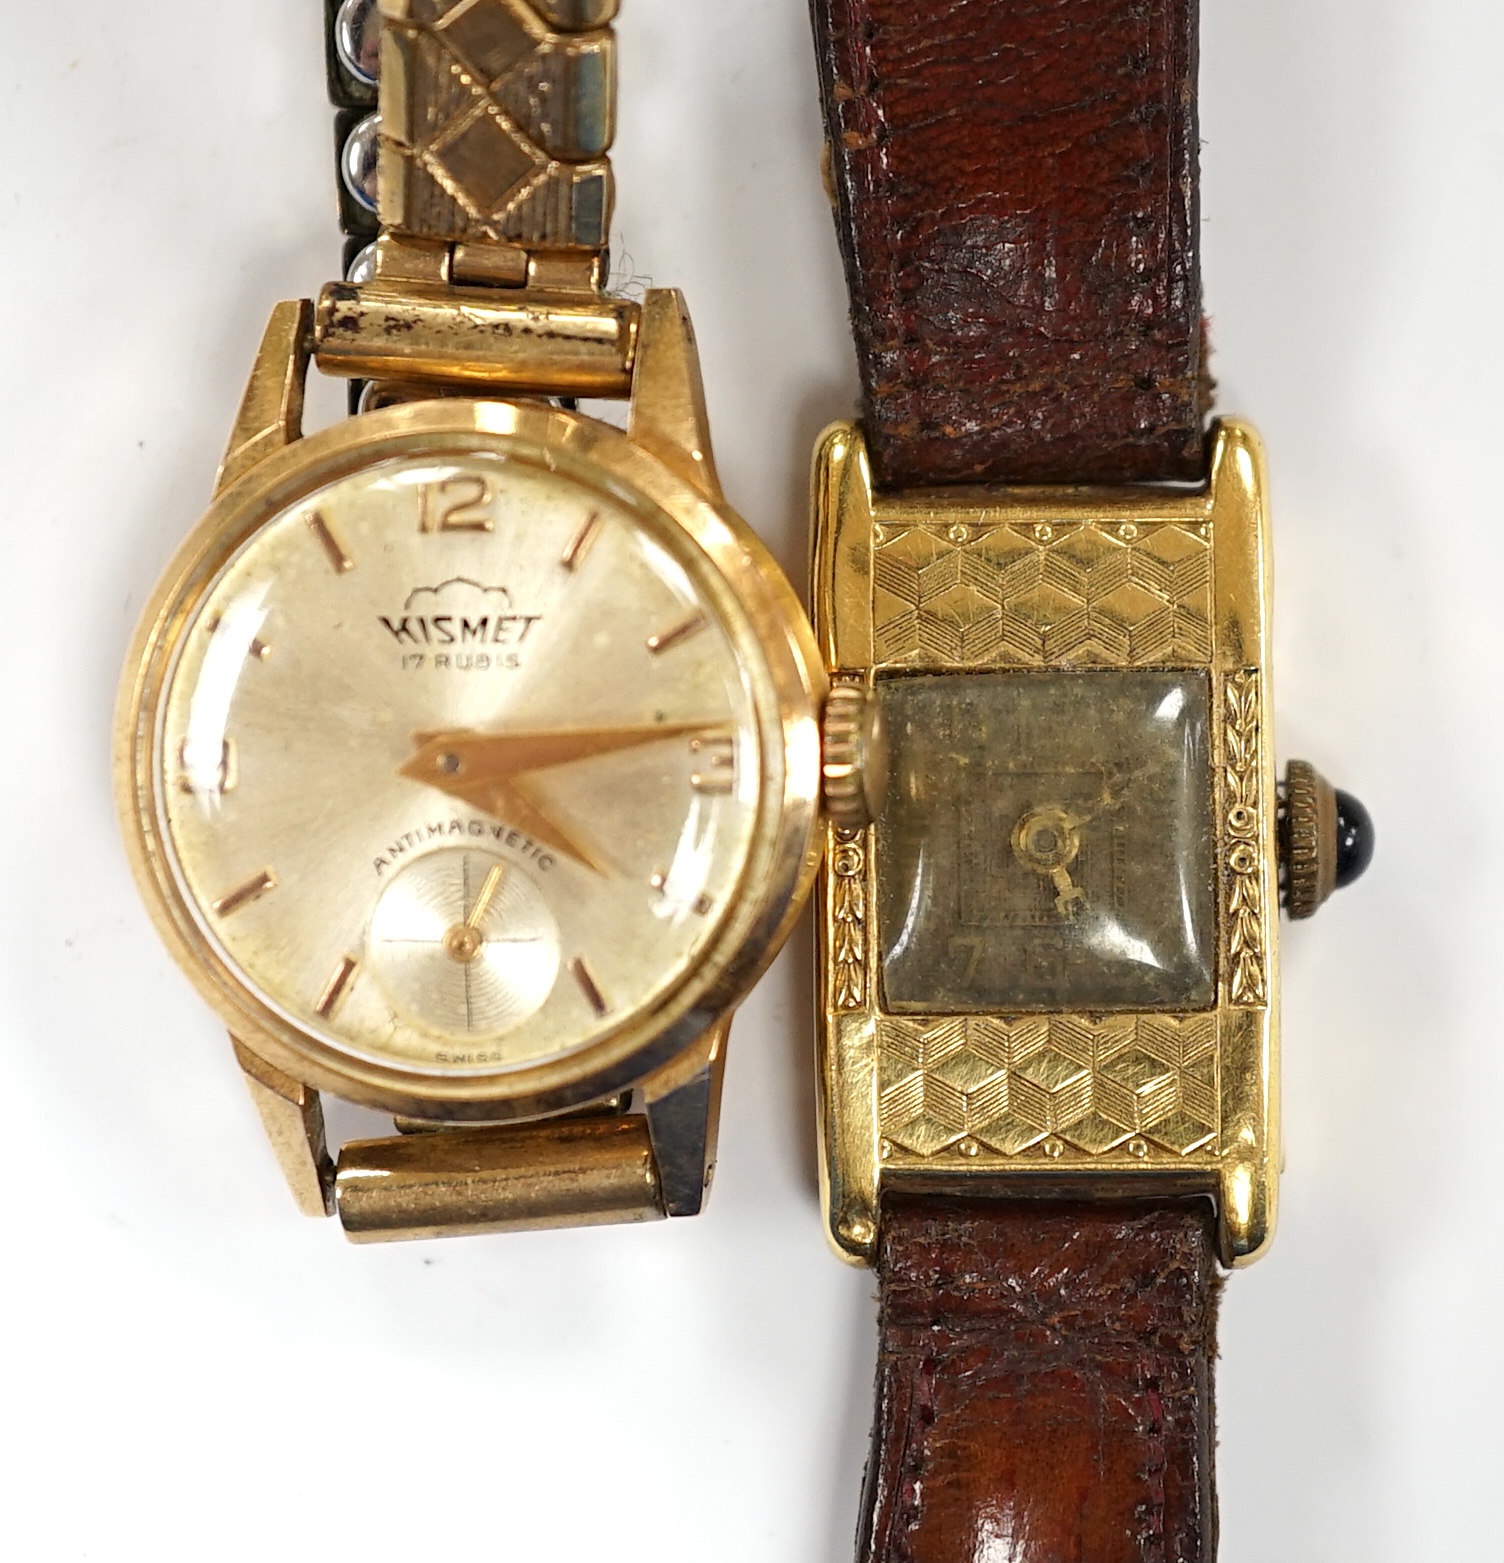 Two 18k cased lady's manual wind wrist watches, including Kismet, on gold plated or leather bracelets.